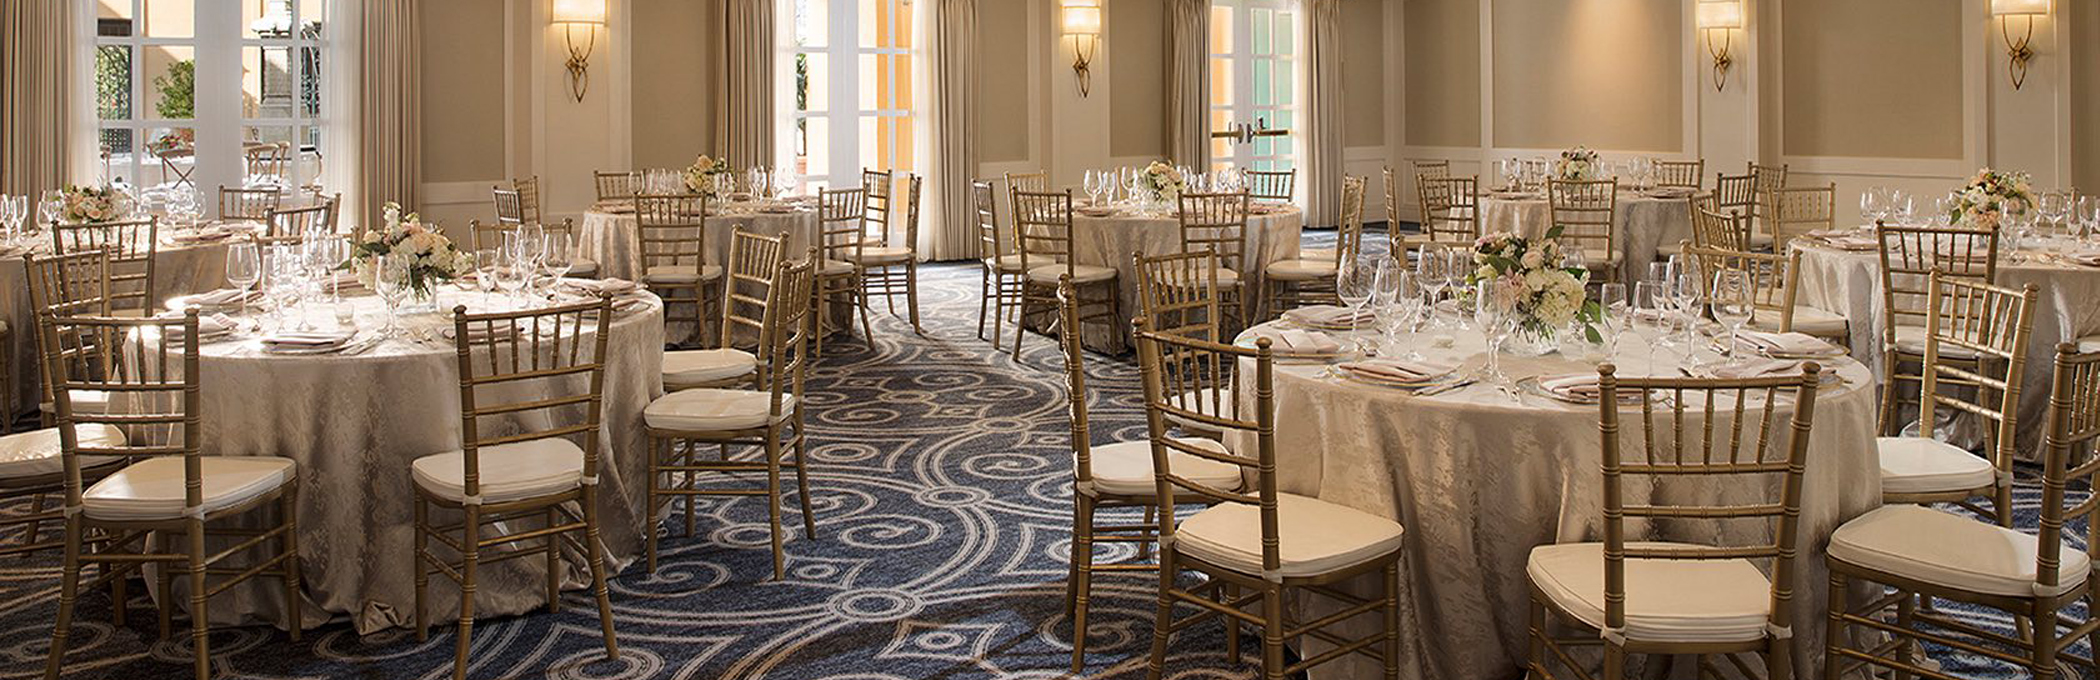 tables and chairs set up in a ballroom